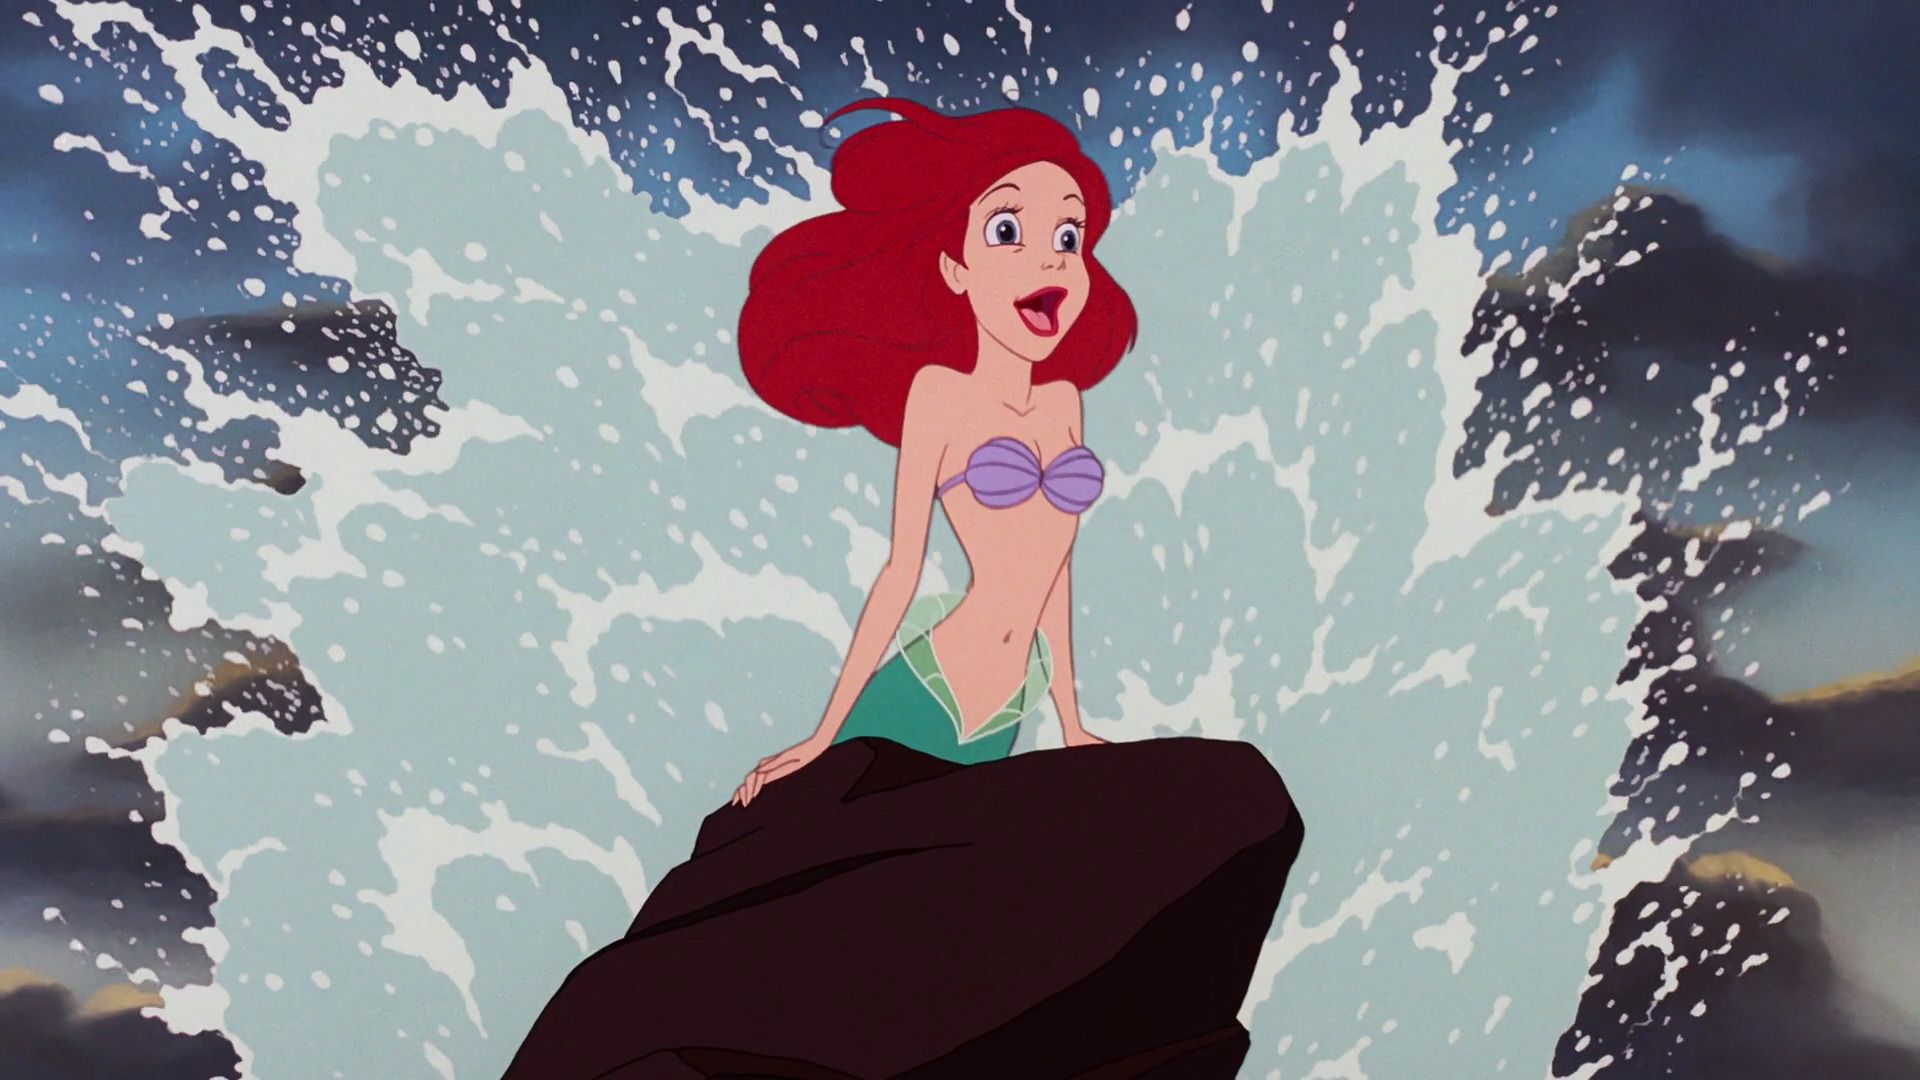 10 Weird Facts About Disney Movies That'll Change The Way You Think About Them